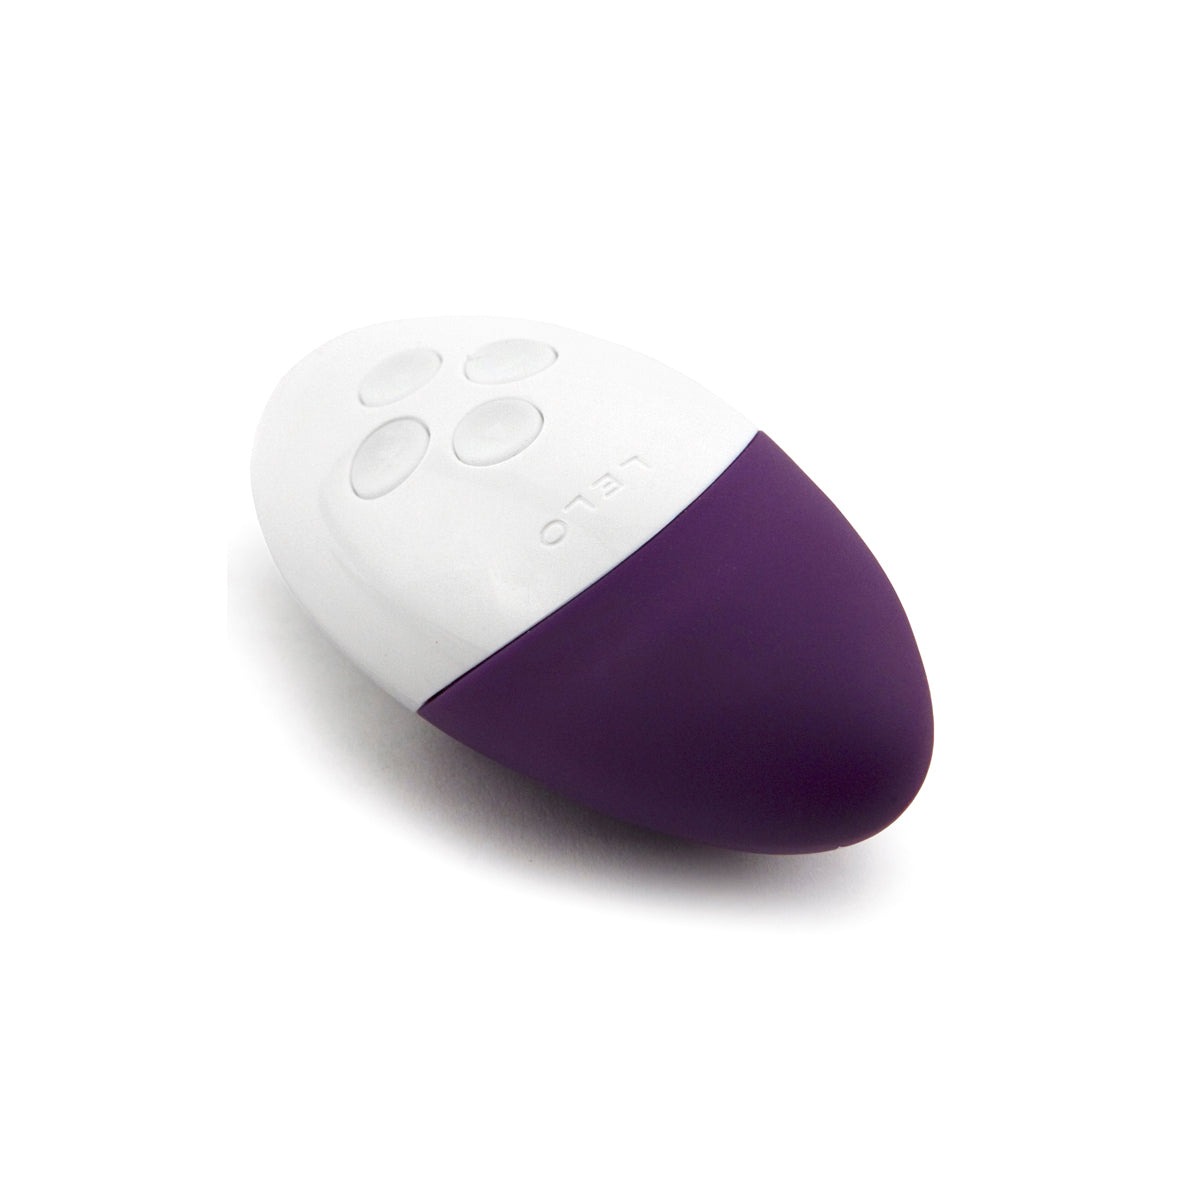 Image of ID 493667213 The Lelo Siri 2 Vibrator - Whisper Quiet and Powerful